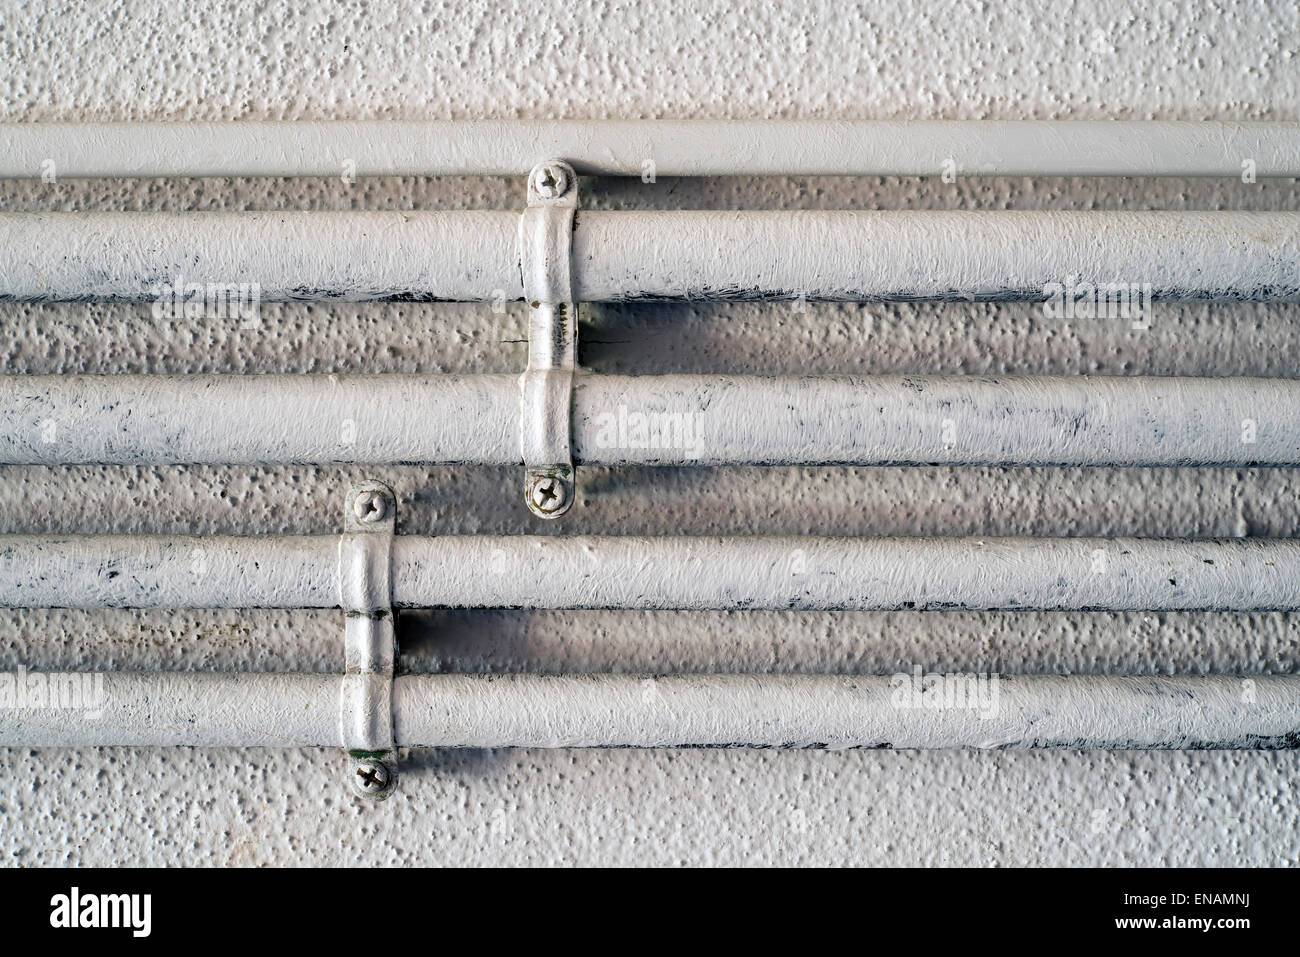 White wall and electrical conduit pipes Stock Photo - Alamy